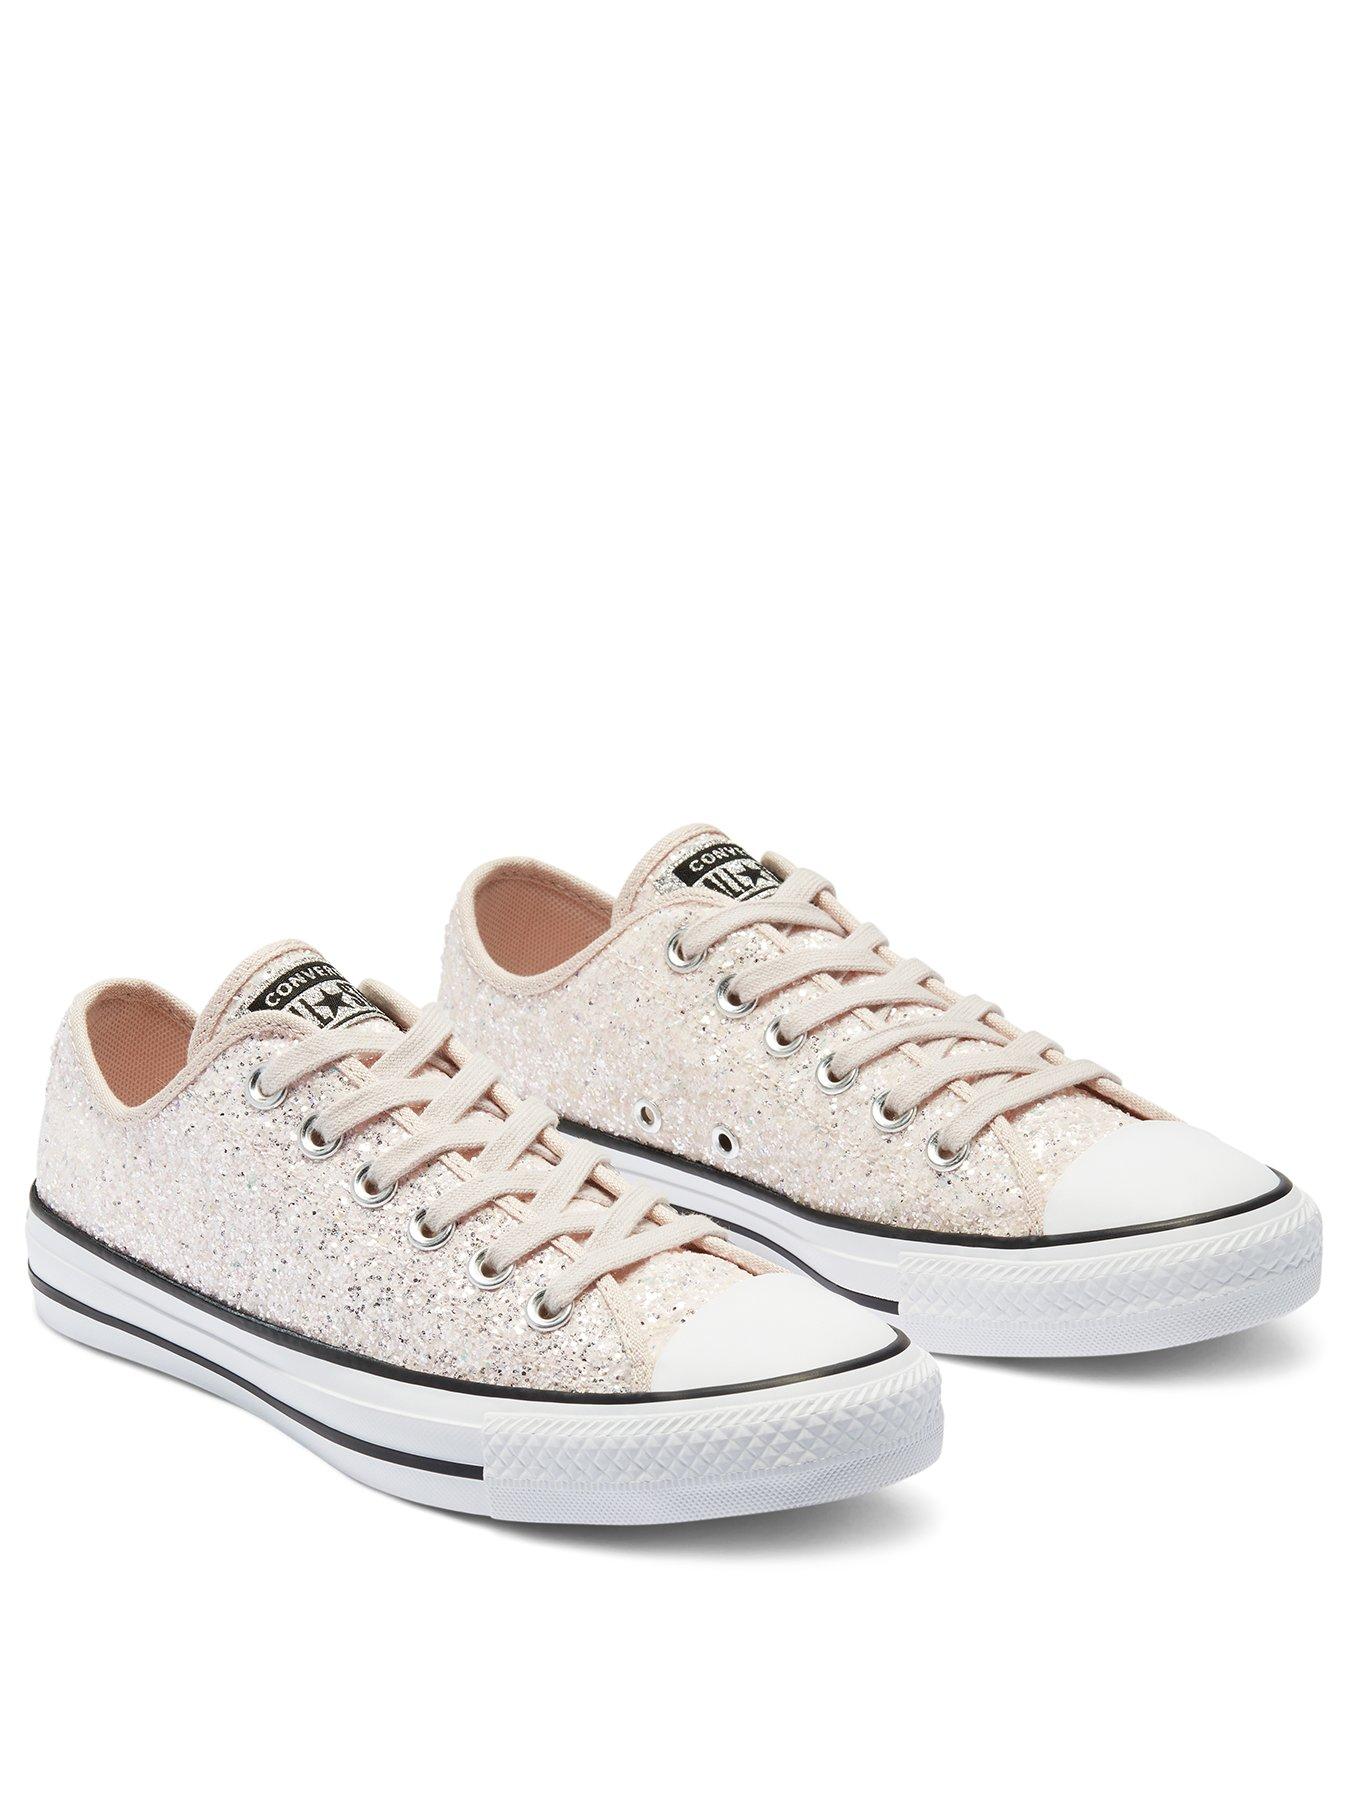 converse rose gold edition